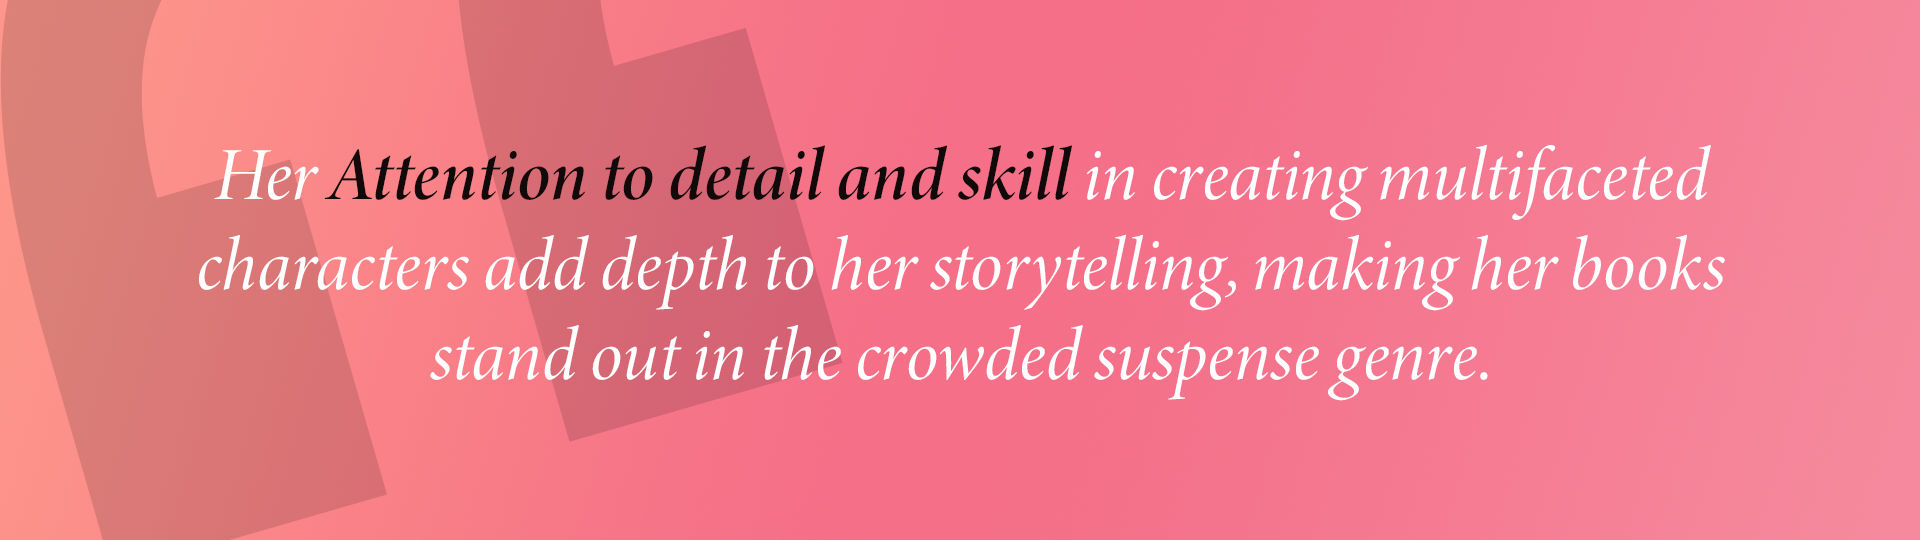 Her Attention to detail and skill in creating multifaceted characters add depth to her storytelling, making her books stand out in the crowded suspense genre.